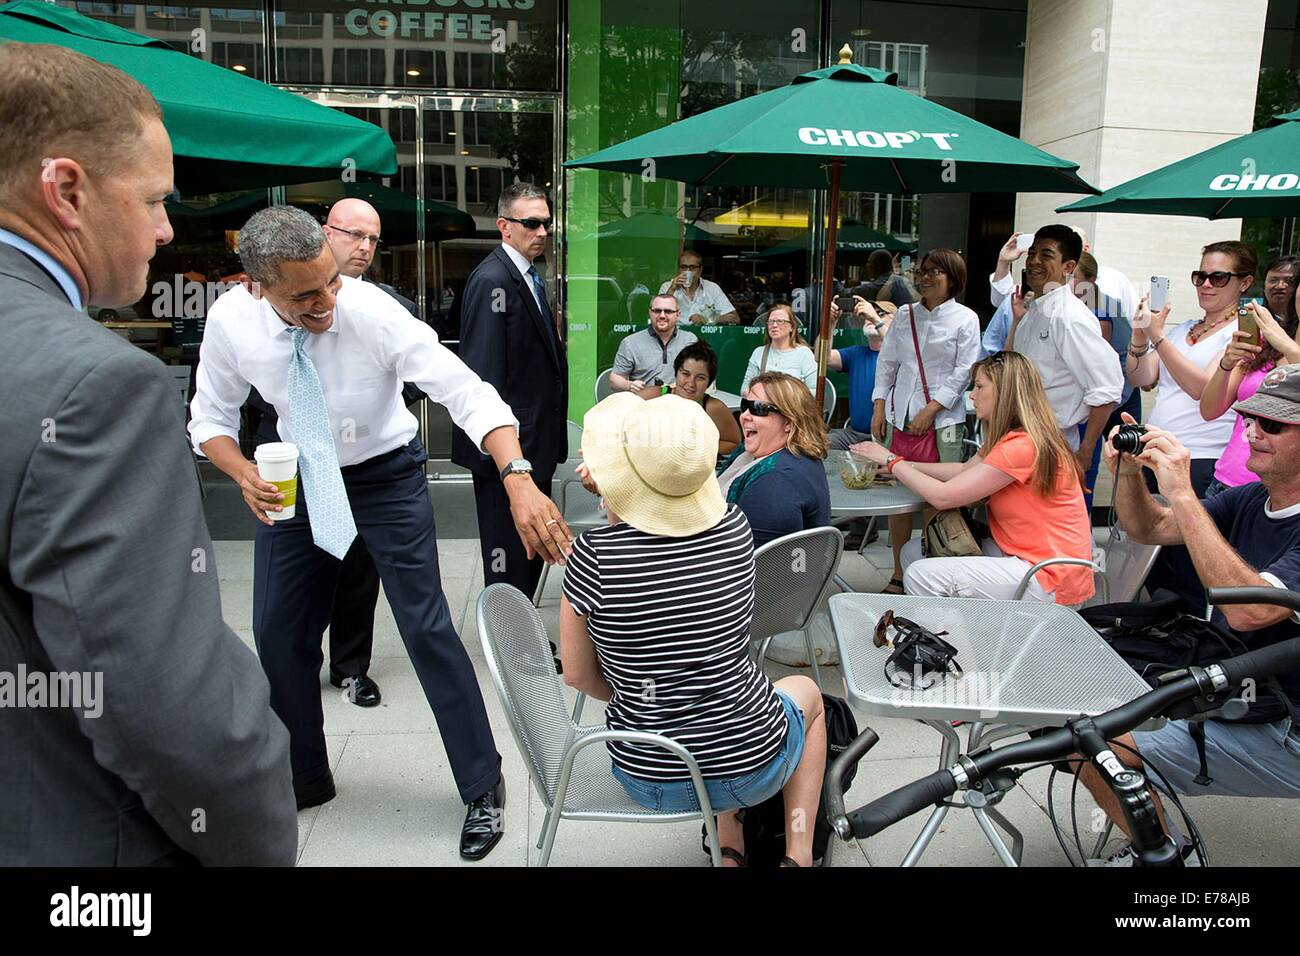 US President Barack Obama greets people sitting outside a Chop't restaurant after dropping by a Starbucks June 9, 2014 in Washington, DC. Stock Photo